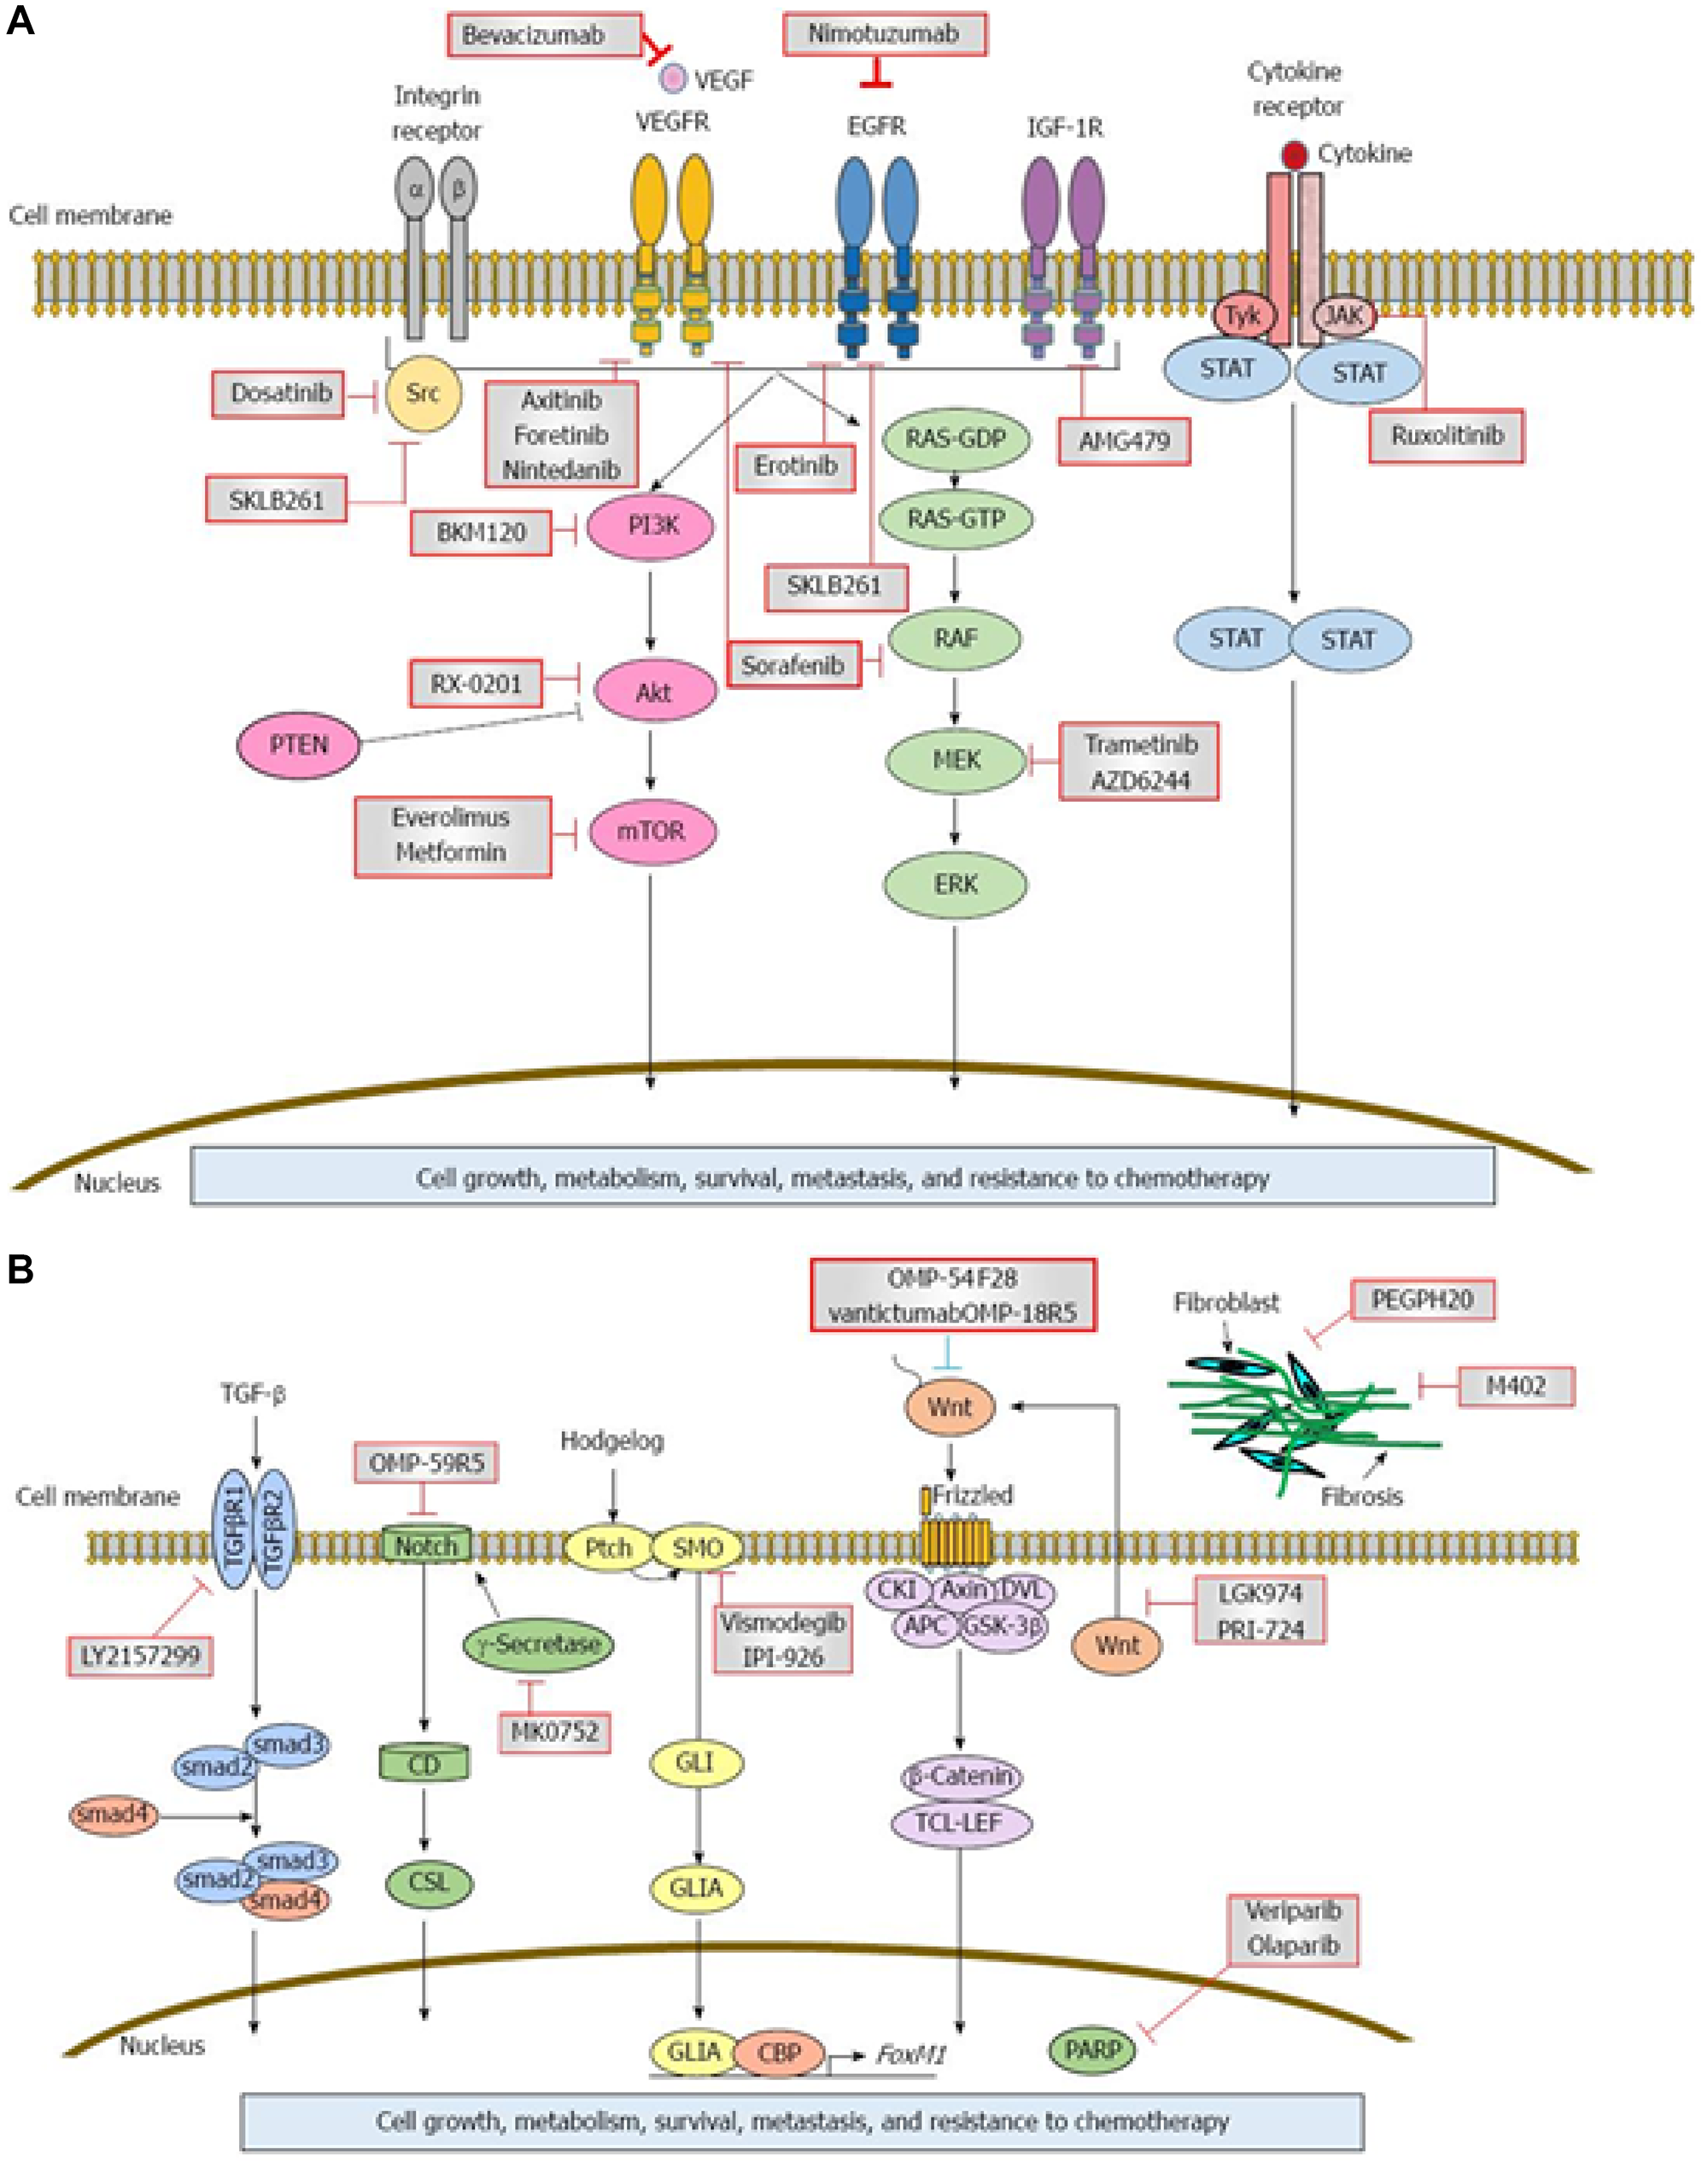 Signaling cascades and therapeutic inhibitors in pancreatic adenocarcinoma (PDAC).